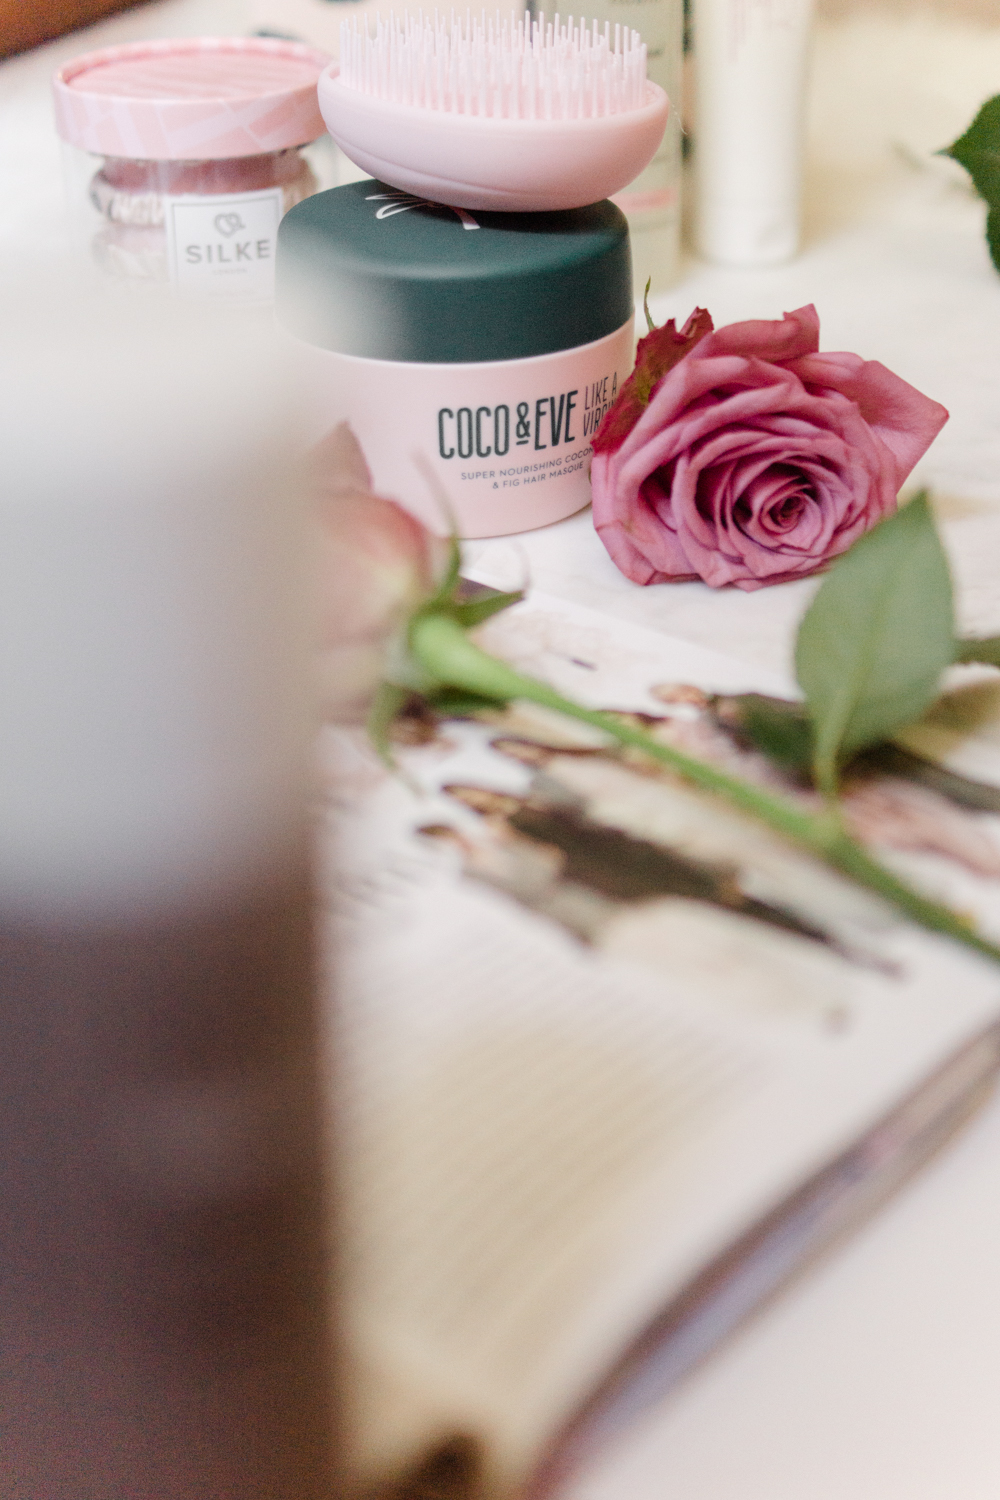 luxury-haircare-favourites-coco-eve-coconut-fig-hair-masque-barely-there-beauty-blog